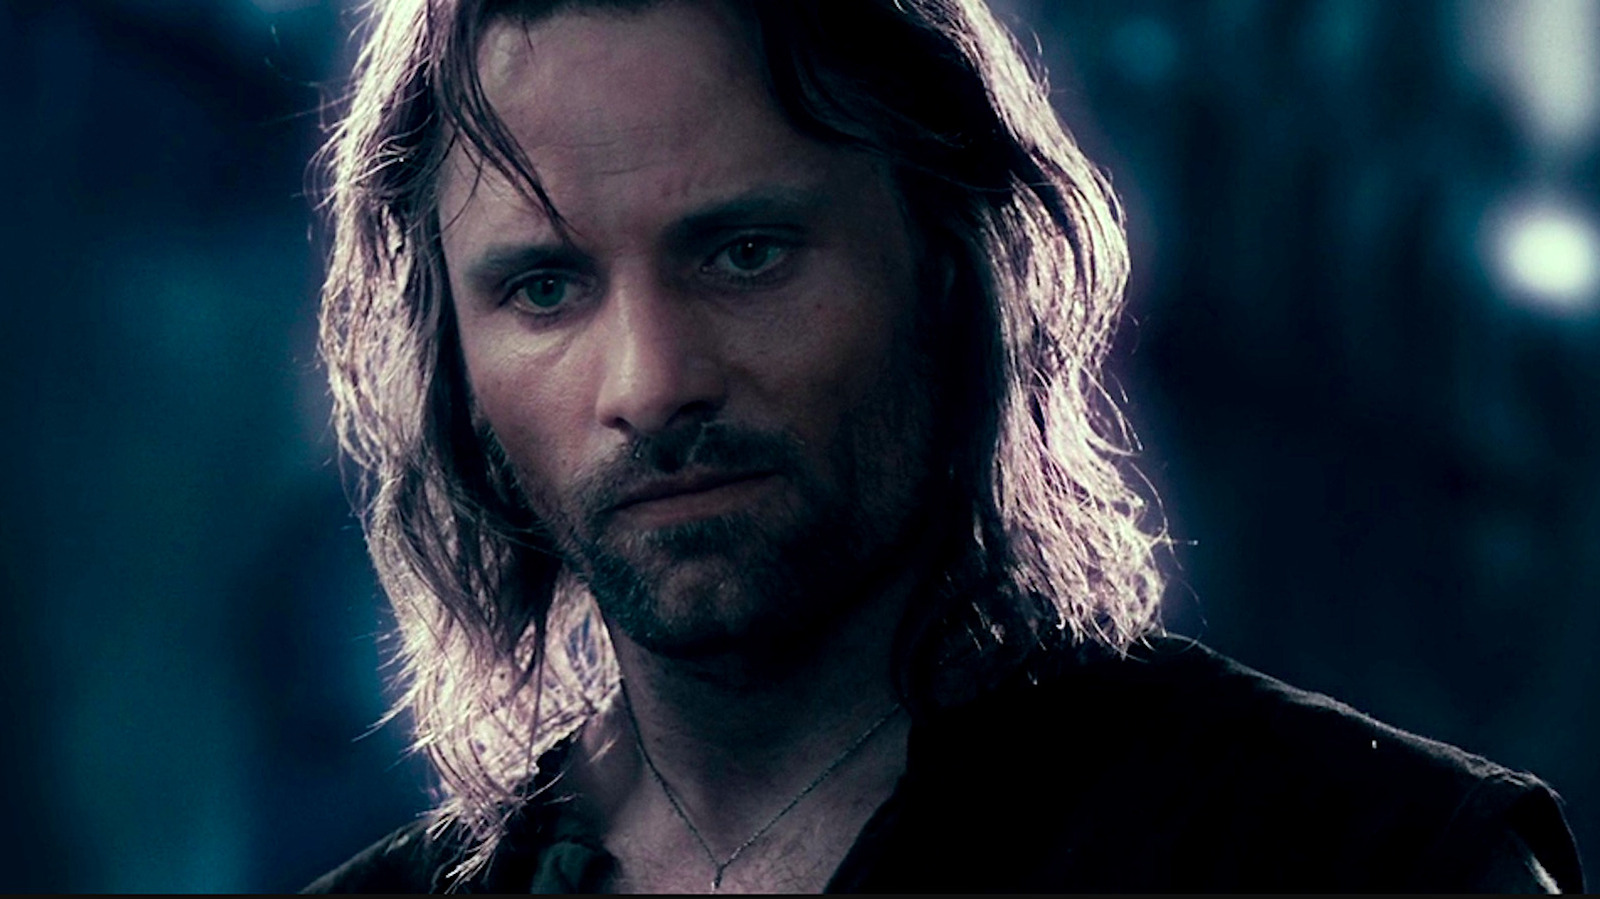 Viggo Mortensen as Aragorn in The Lord of the Rings trilogy